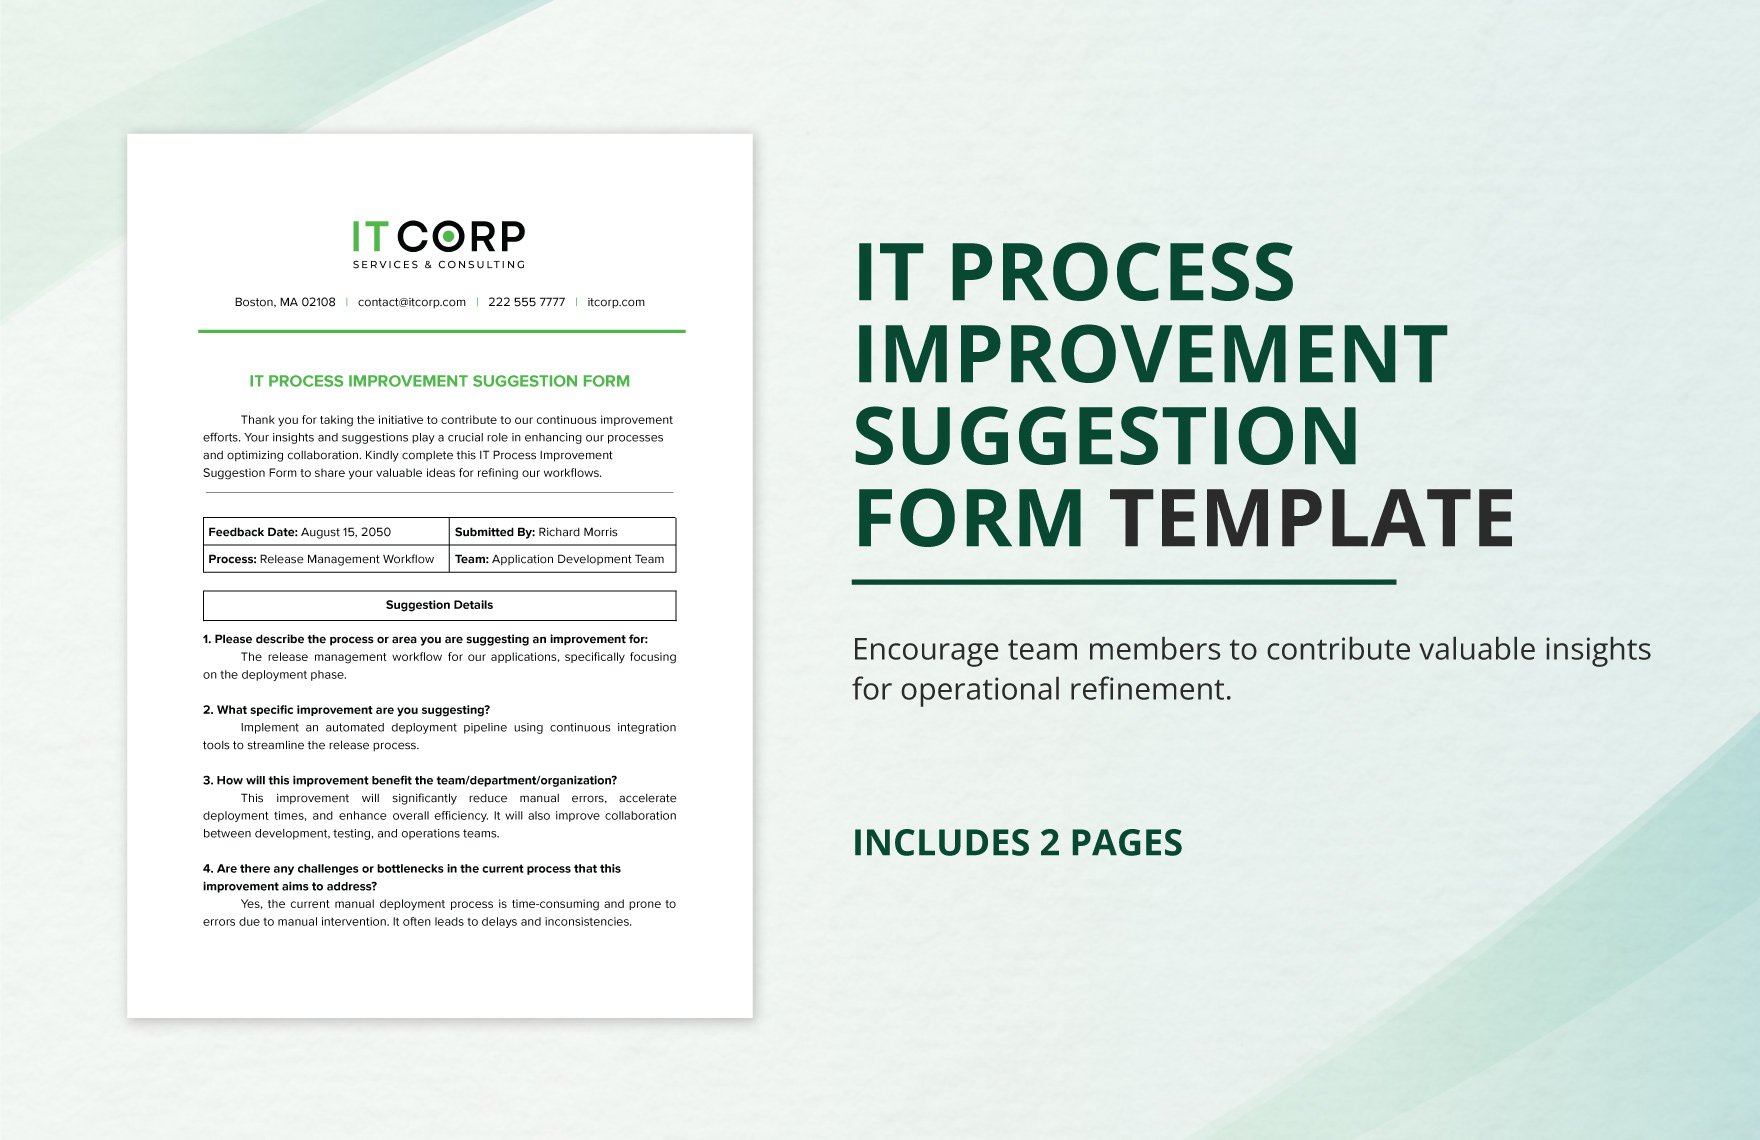 IT Process Improvement Suggestion Form Template in Word, Google Docs, PDF